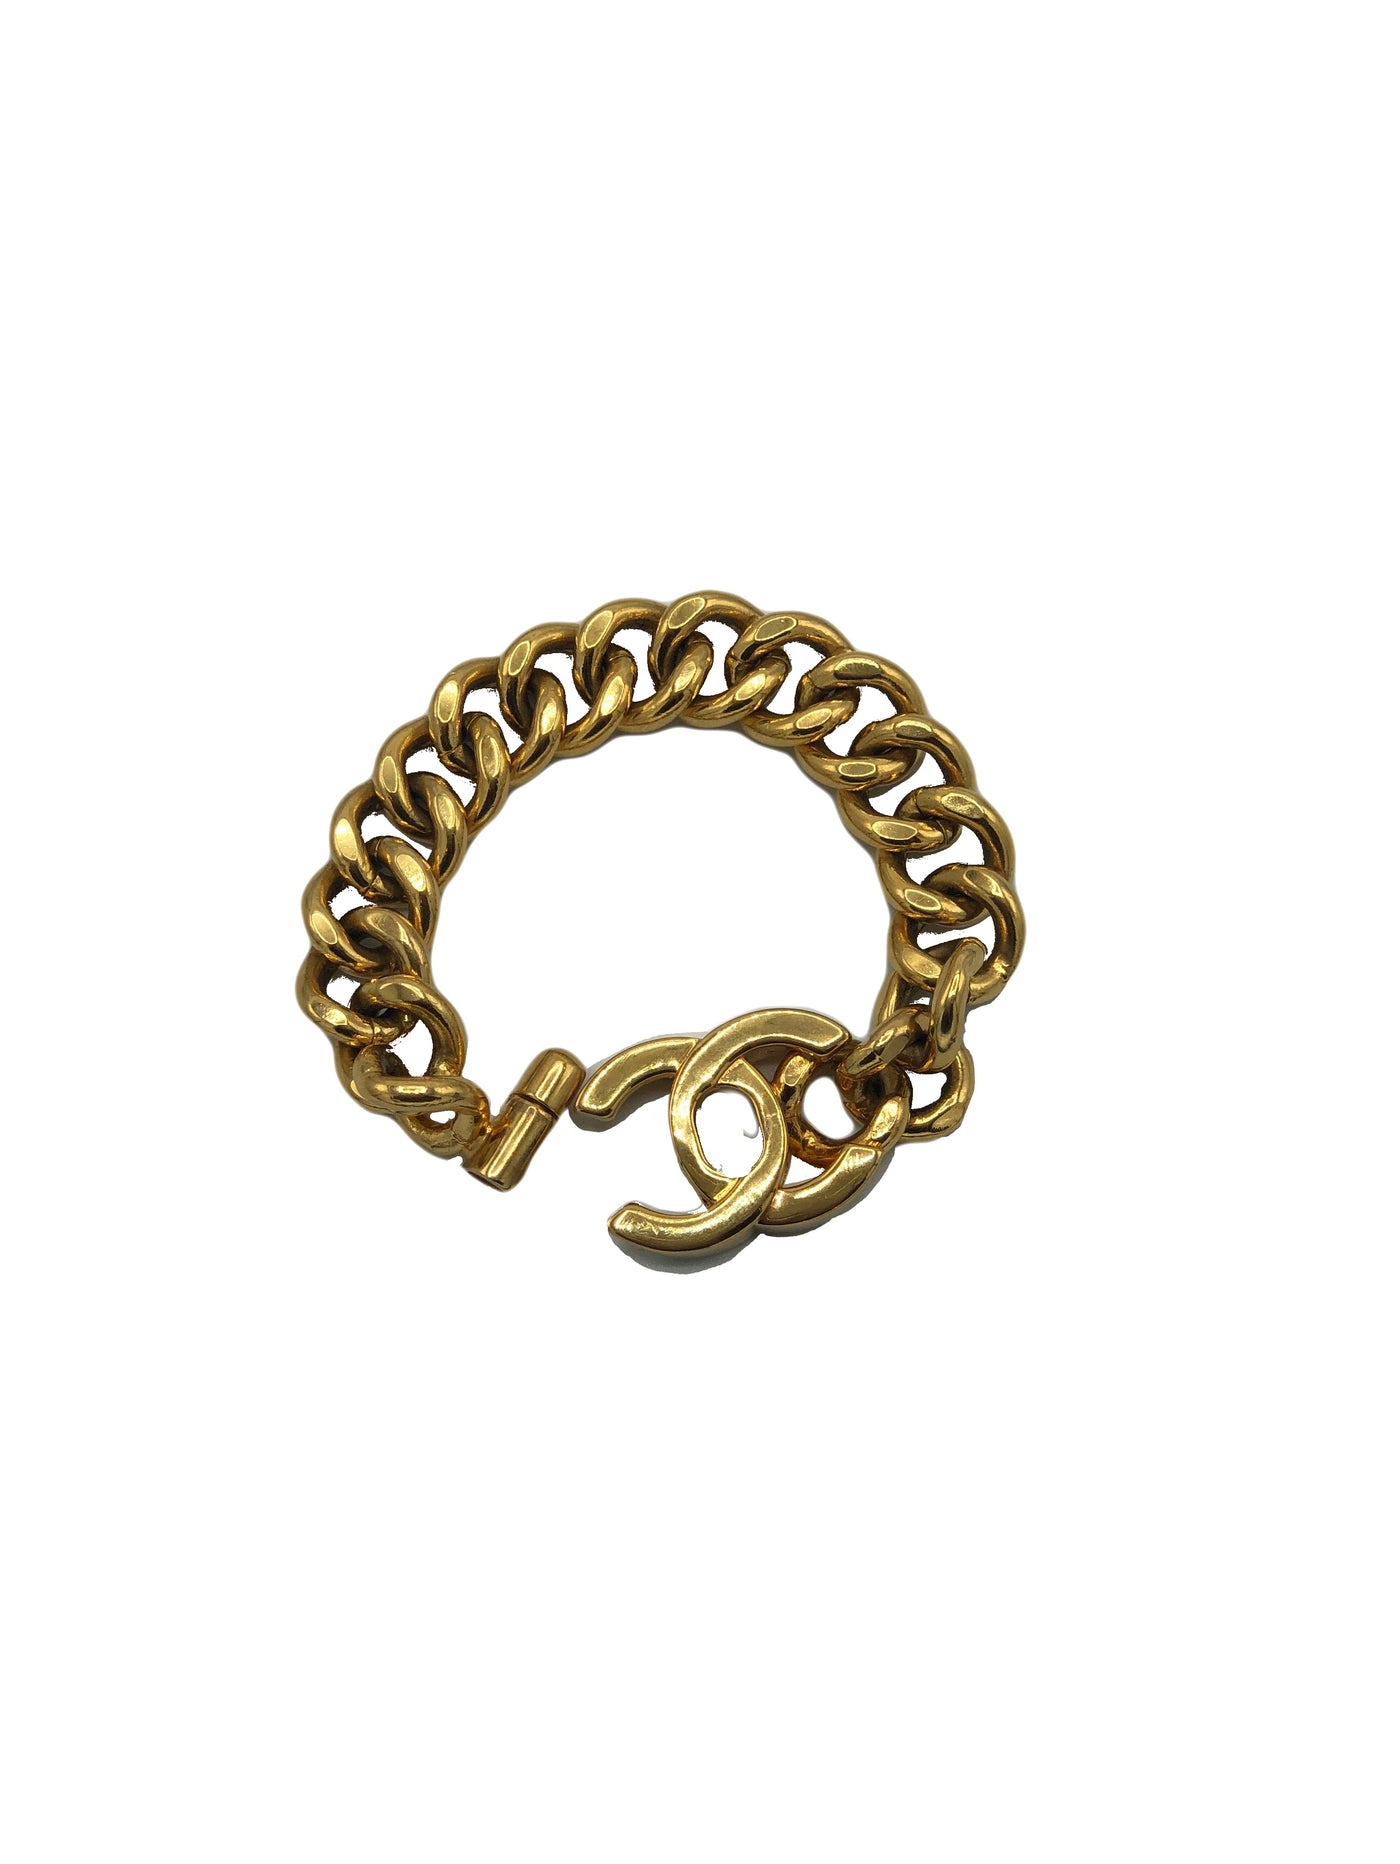 CHANEL rare and collectible 1990’s 24 carats gold turnlock bracelet